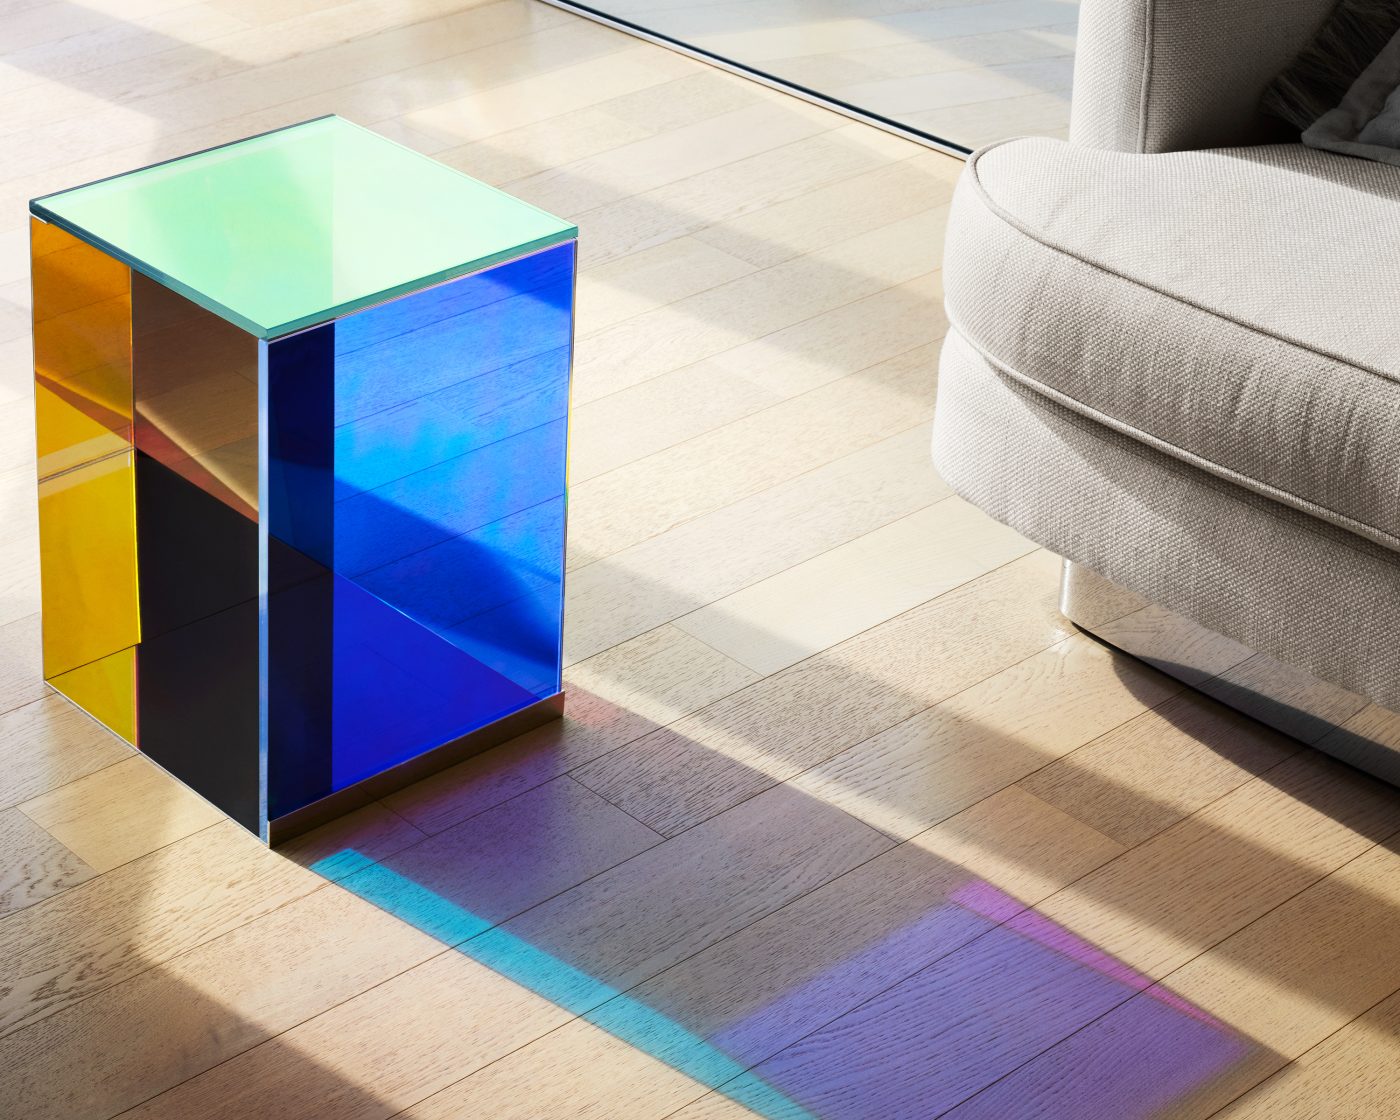 Lauren Rottet's Dichroic side table refracts the sunlight in her New York apartment